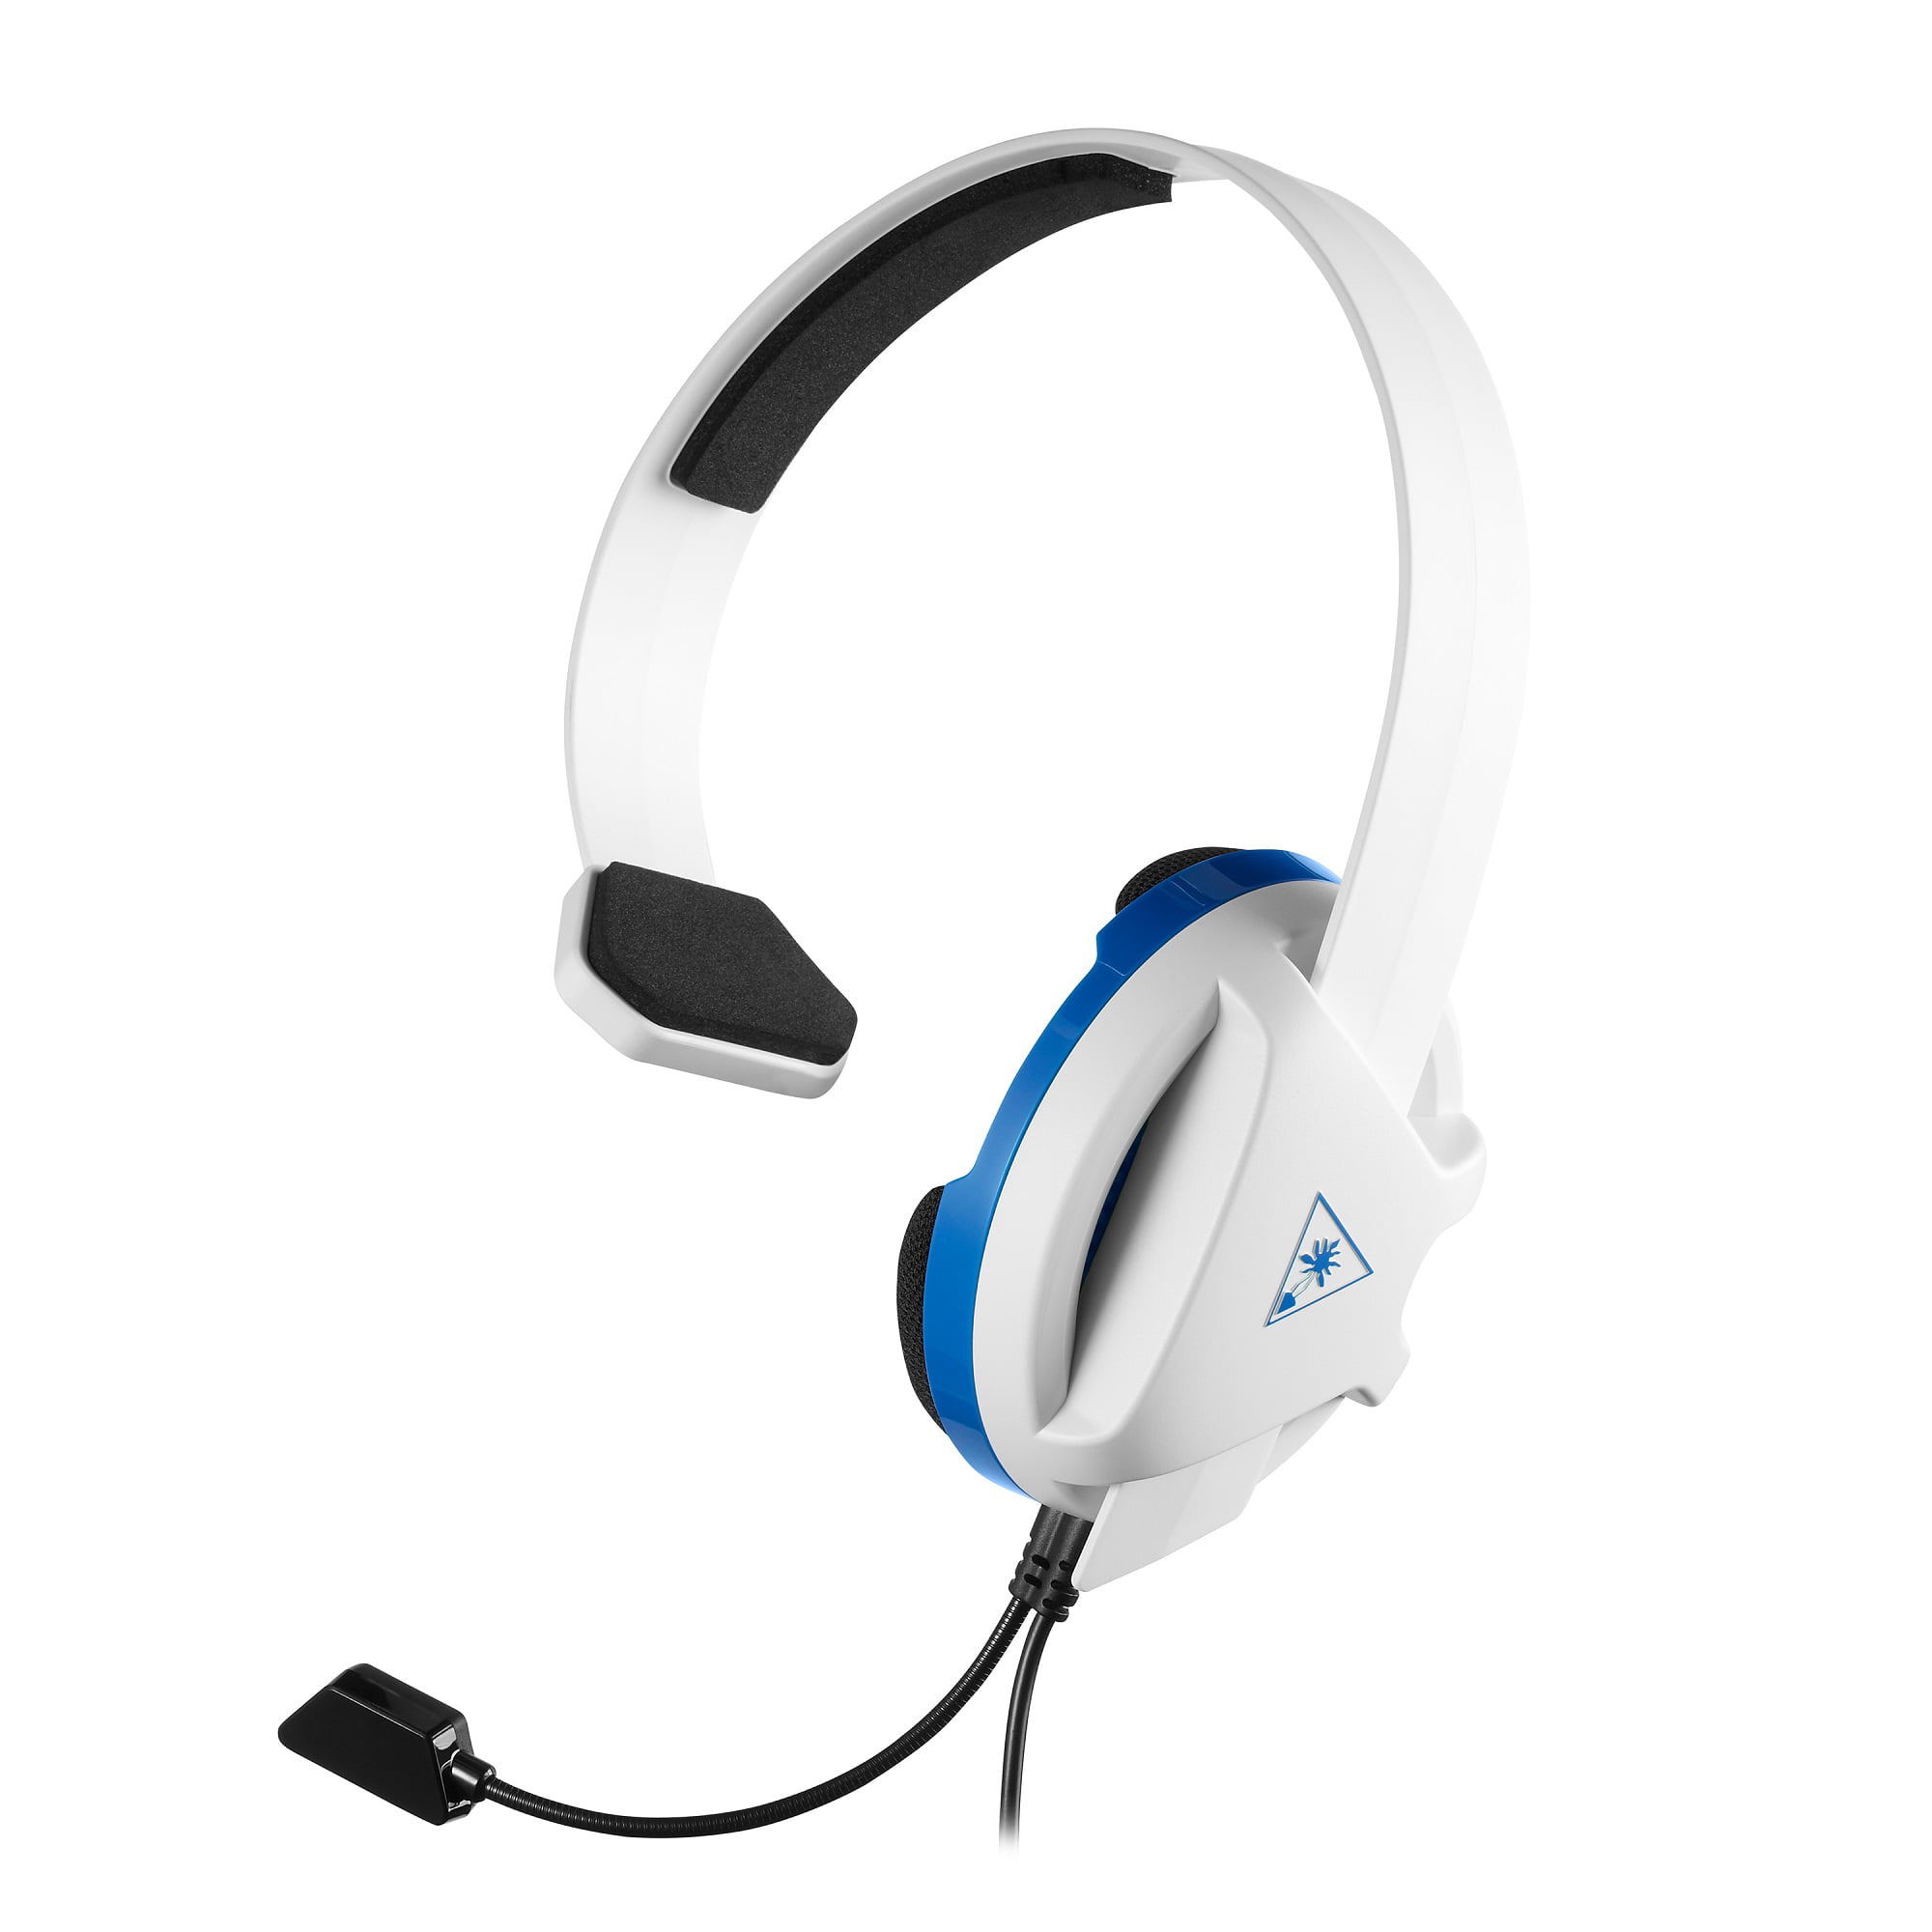 Turtle Beach One, Recon (White) Headset Mobile PC, Xbox for Chat PS4